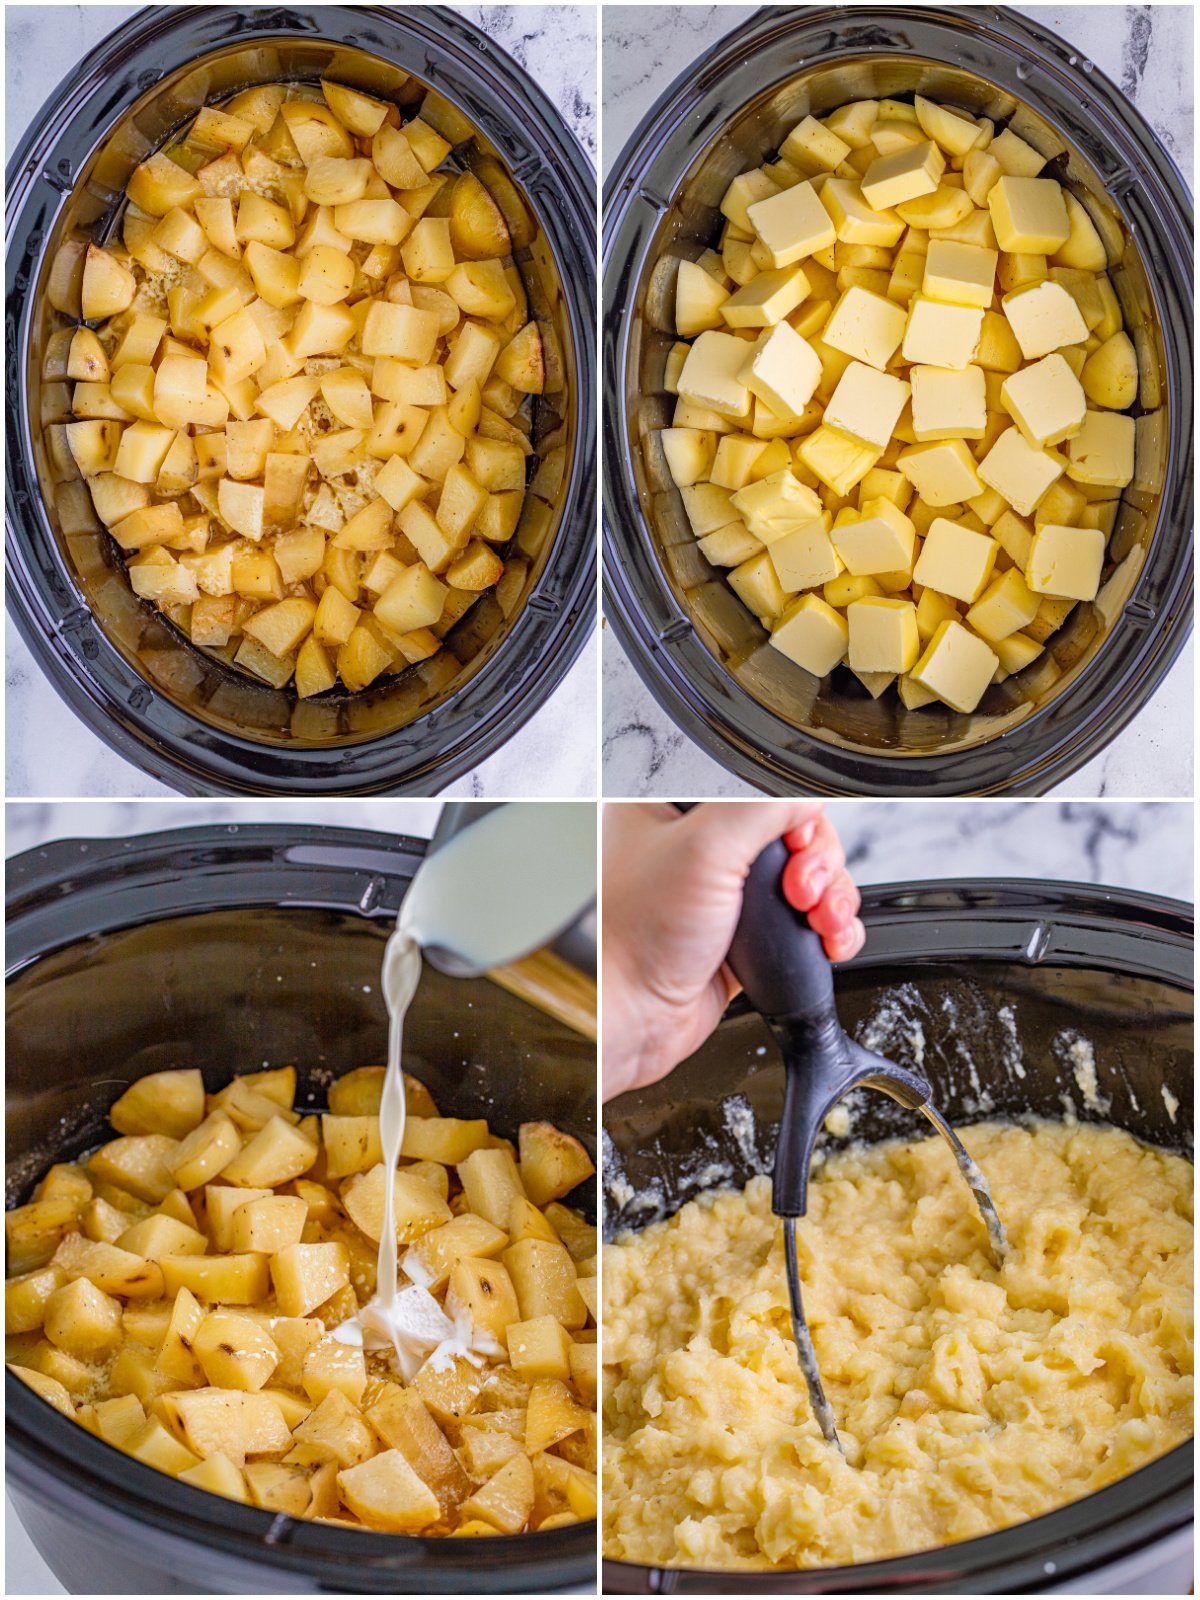 Step by step photos on how to make Slow Cooker Mashed Potatoes